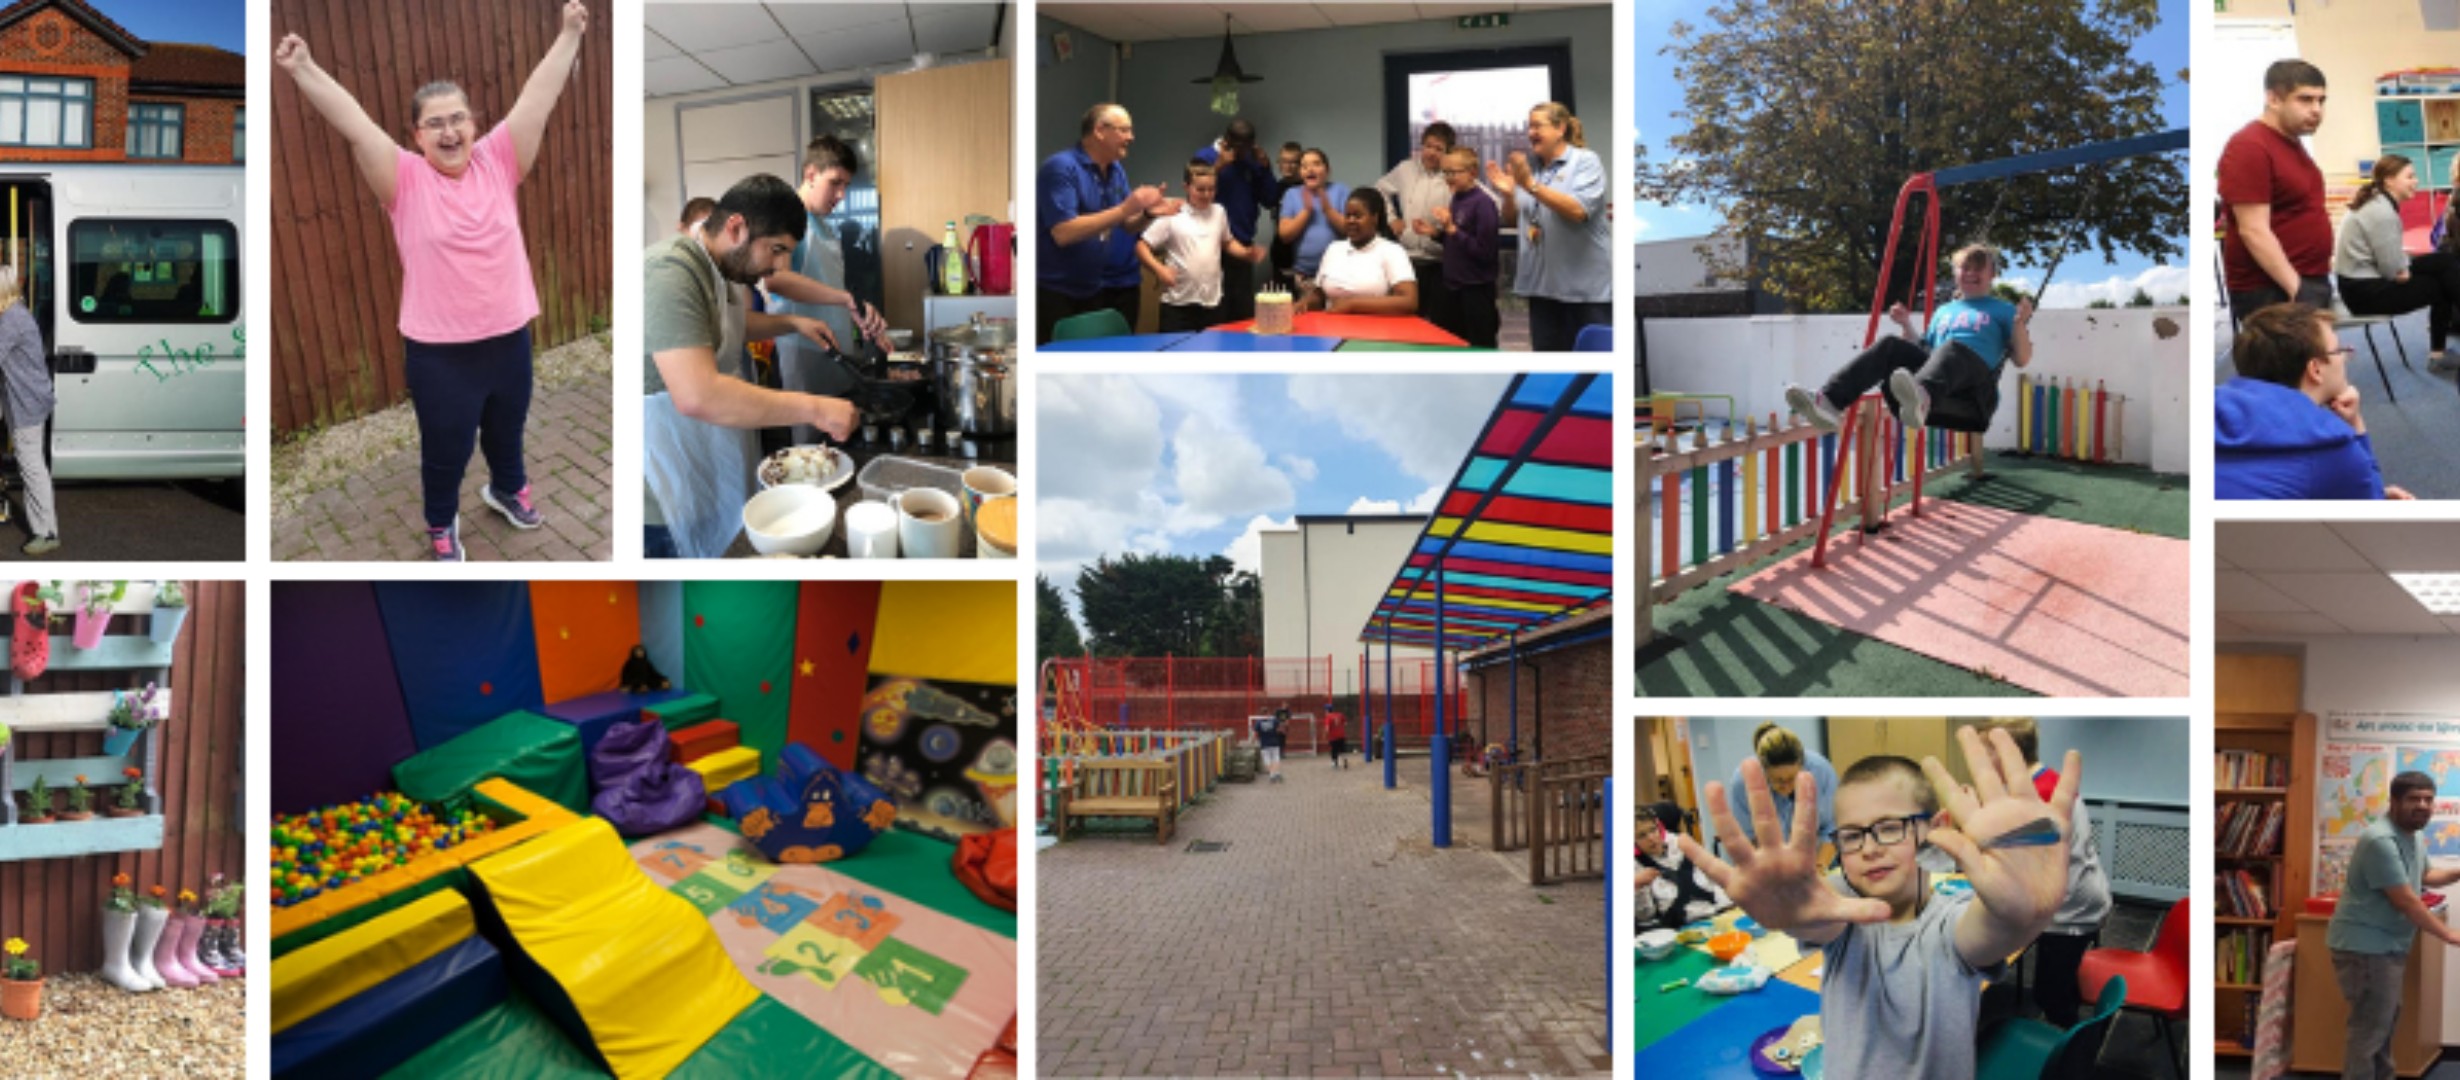 A collage with images of life at the spring centre. People cooking, the soft play area with ball pit, the outdoor playground with swing and trampoline, a boy holding up his painted hands, a woman in pink shirt cheering